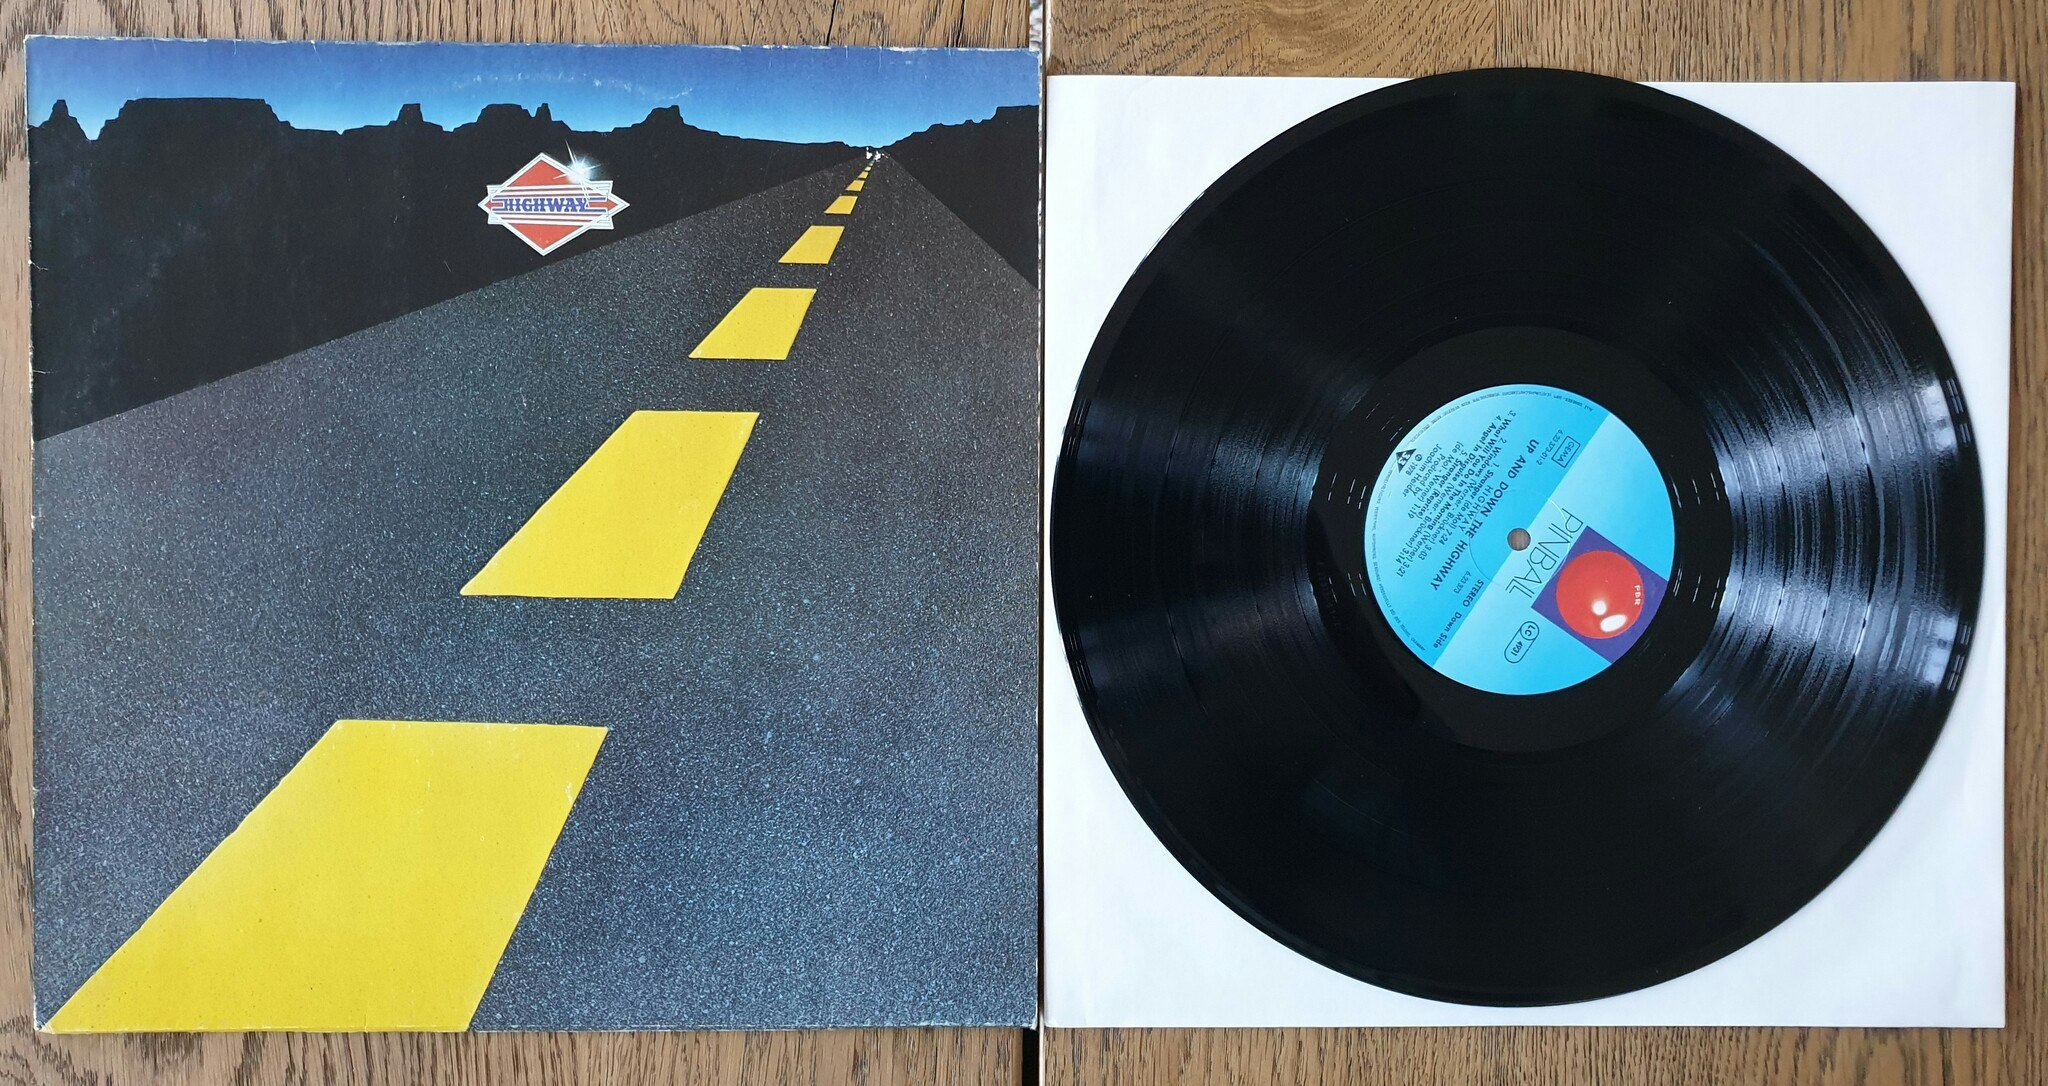 Highway, Up and down the highway. Vinyl LP